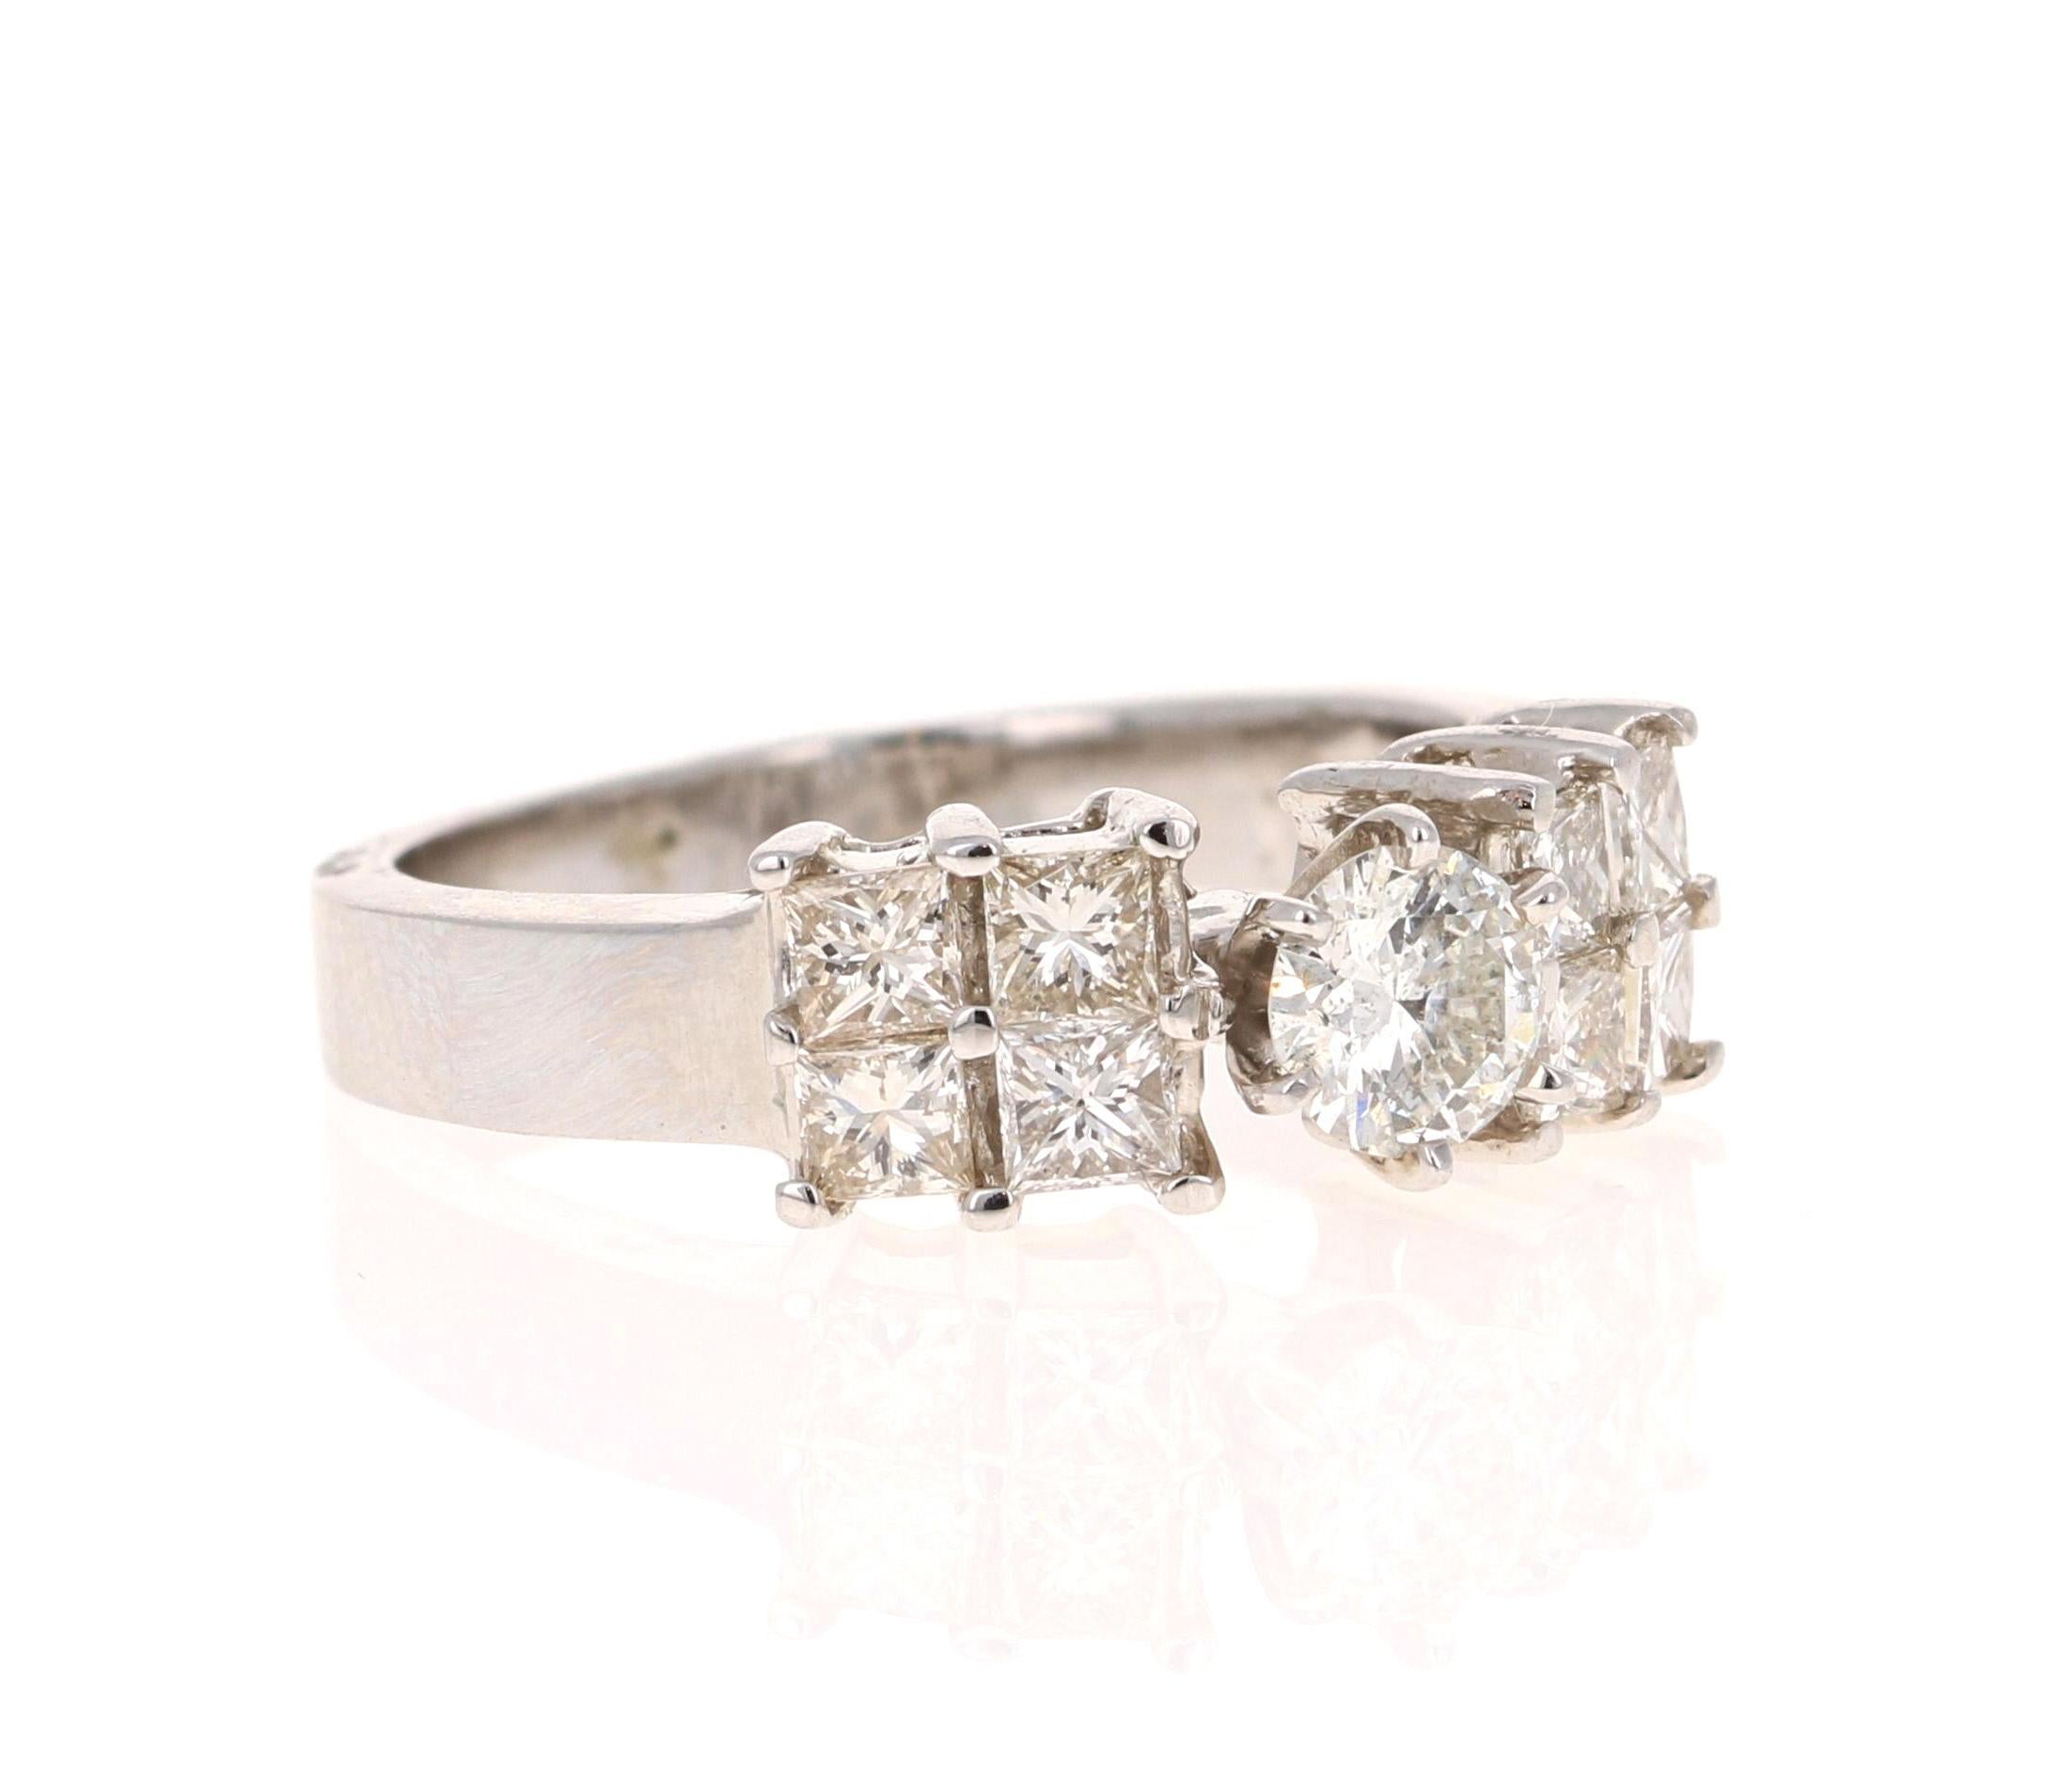 This pretty setting has a Round Cut Diamond in the center that weighs 0.38 Carats and 8 Princess Cut Diamonds on the side that weigh 0.87 Carats.  The total carat weight of the ring is 1.25 Carats. 

It is beautifully set in 14 Karat White Gold and